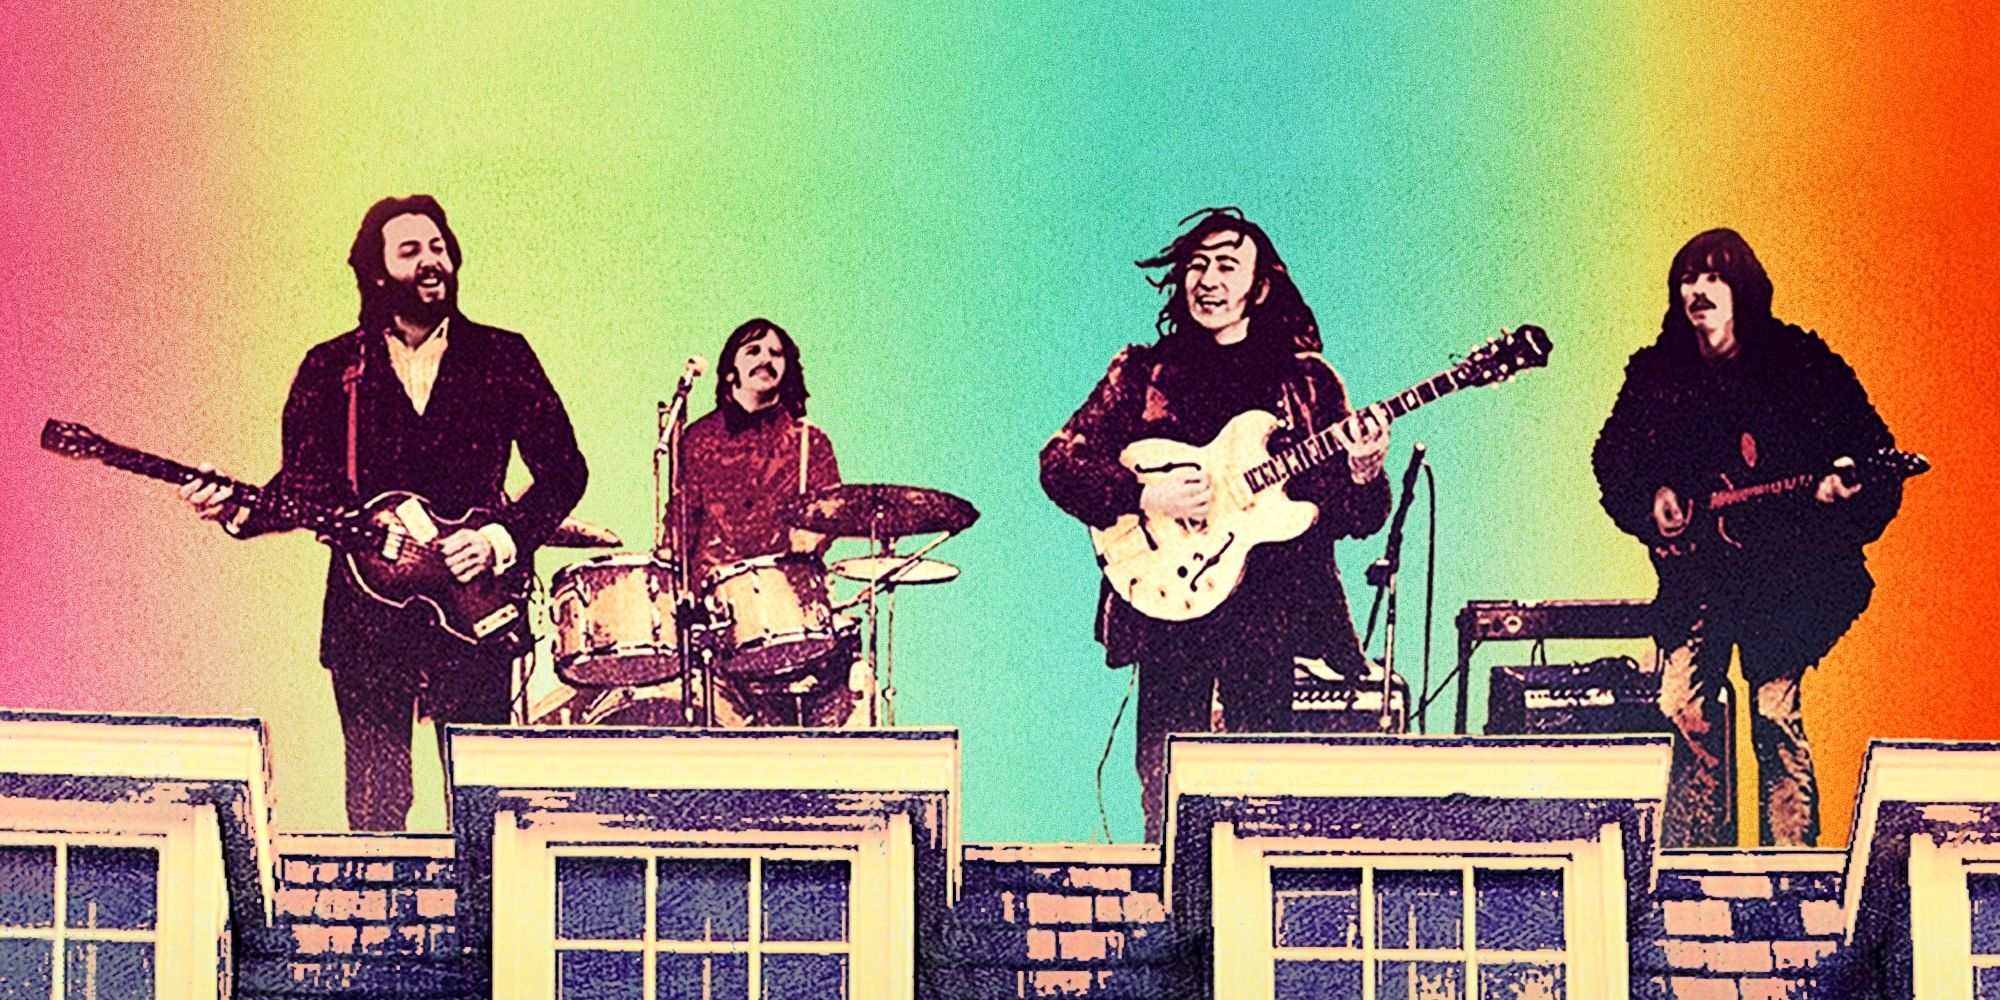 The Beatles playing on a rooftop in The Beatles: Get Back.